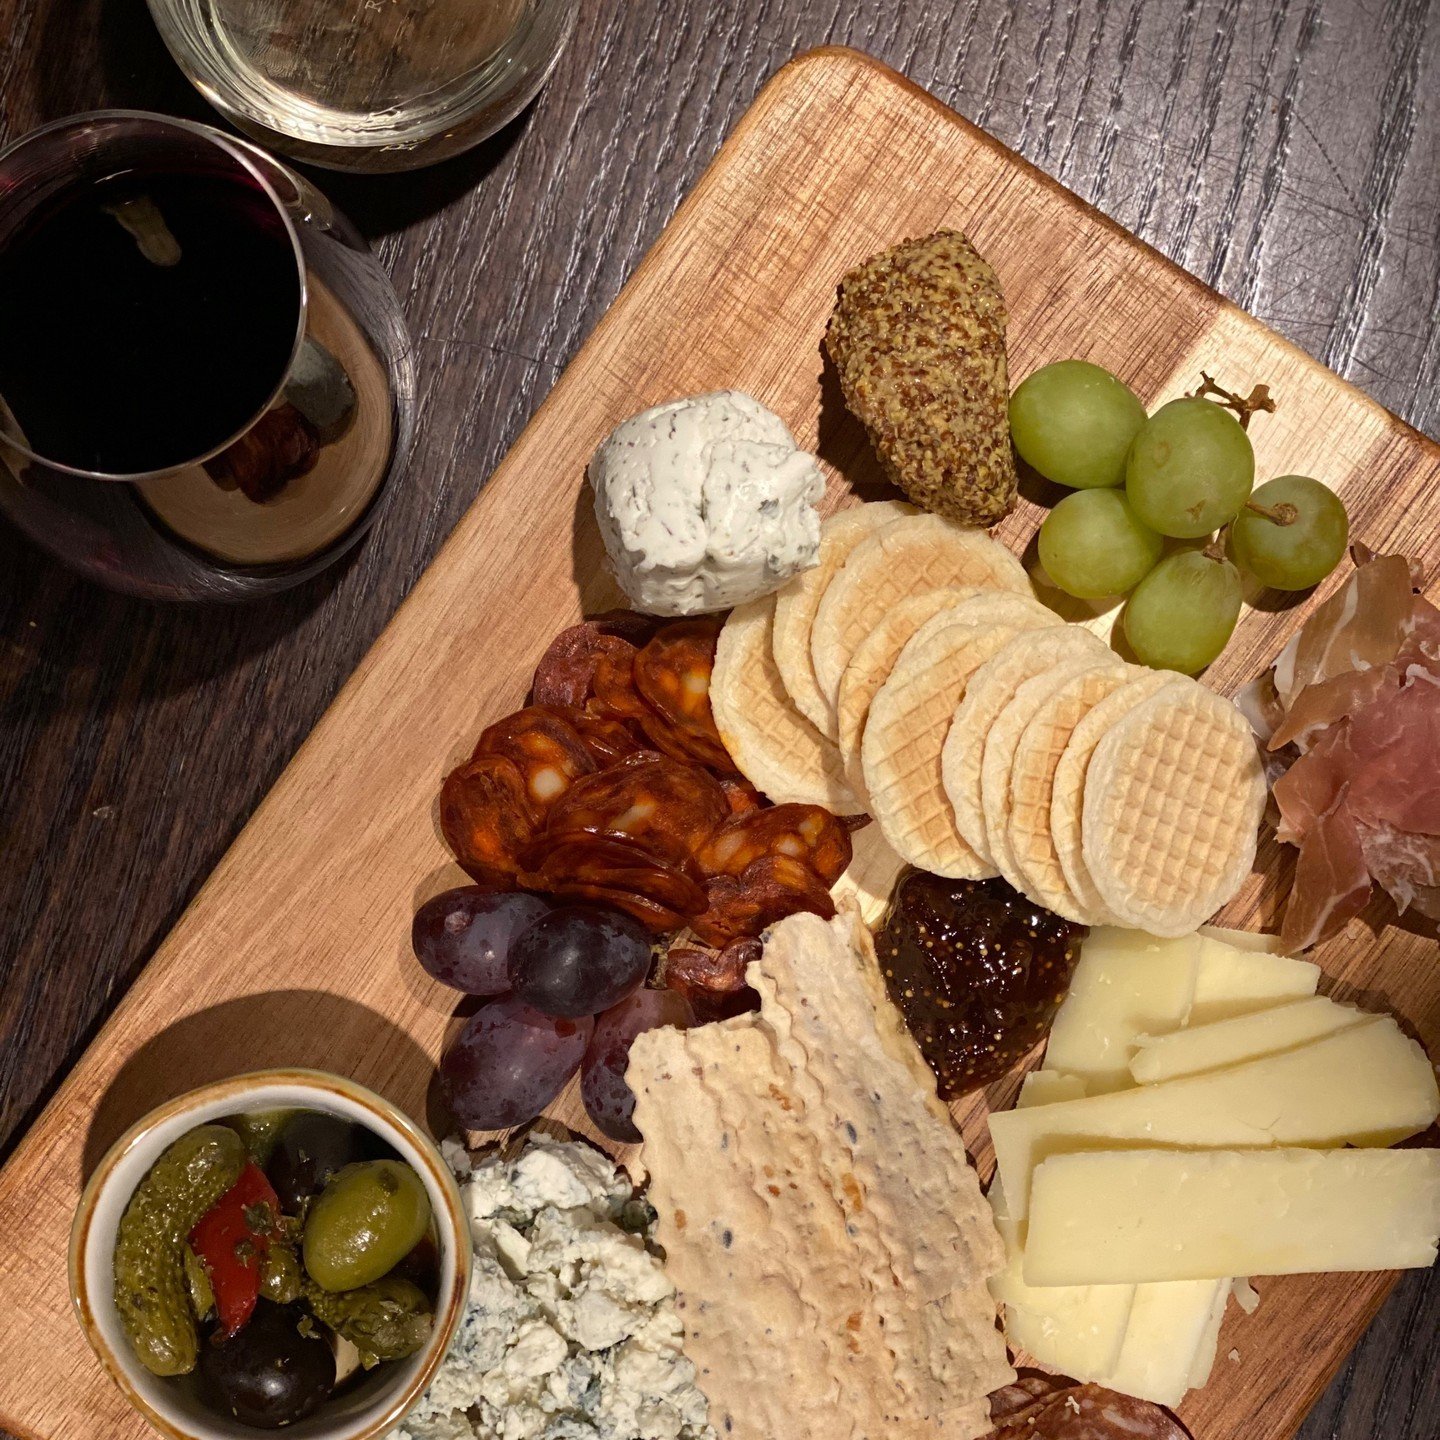 You're only one day away from excellent vino and snack boards!

HOURS
Friday: 5pm-11pm
Saturday 5pm-11pm

#winebar #wine #winelover #winetasting #winelovers #winetime #vino #winestagram #winery #wineoclock #winelife #instawine #redwine #food #sommeli